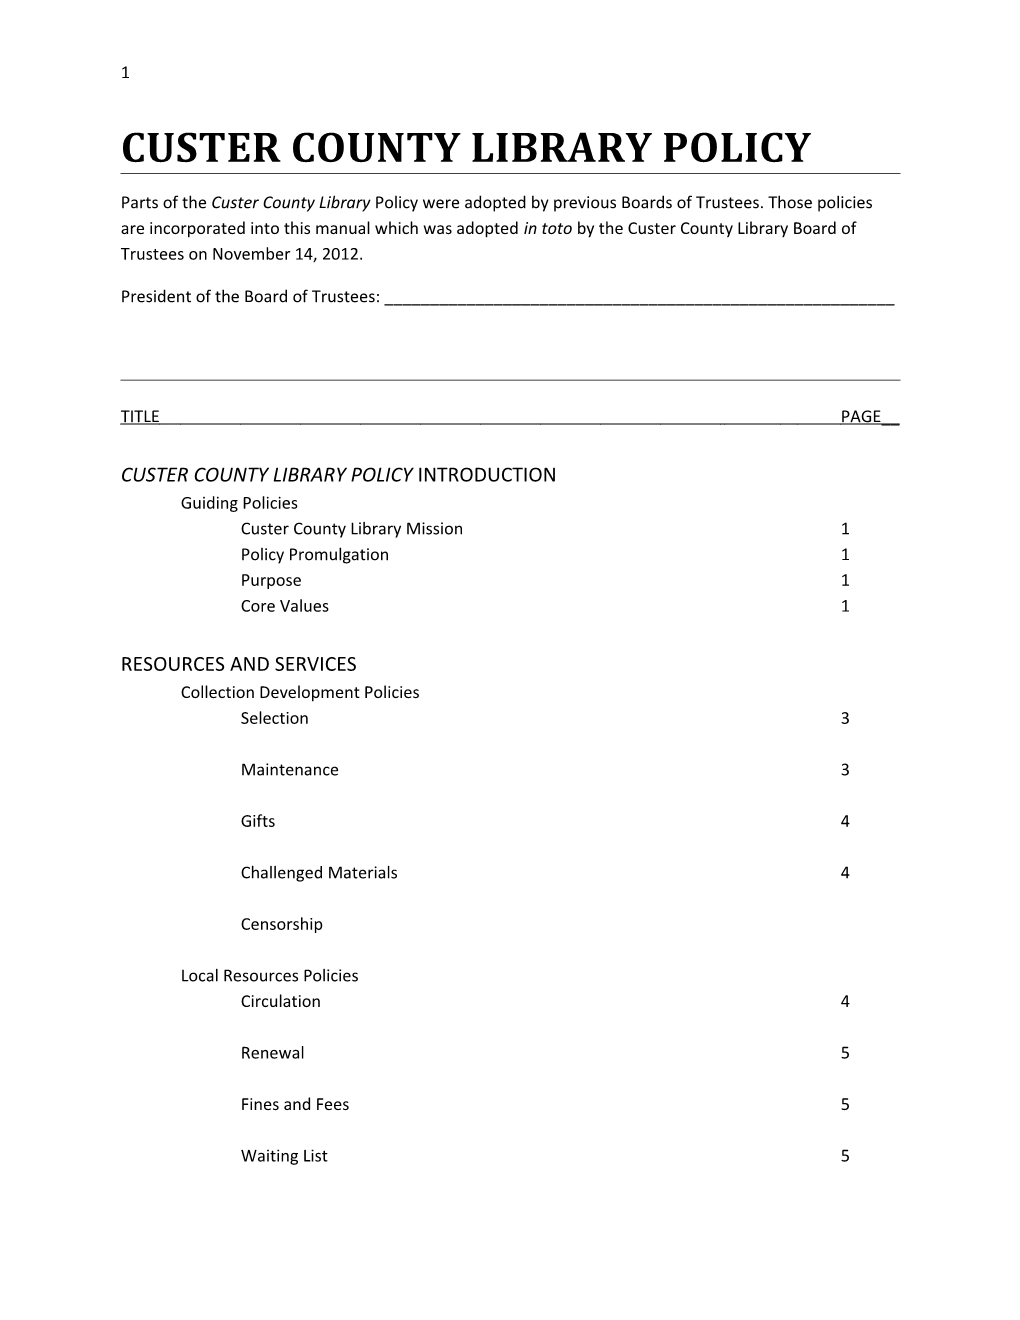 Custer County Library Policy